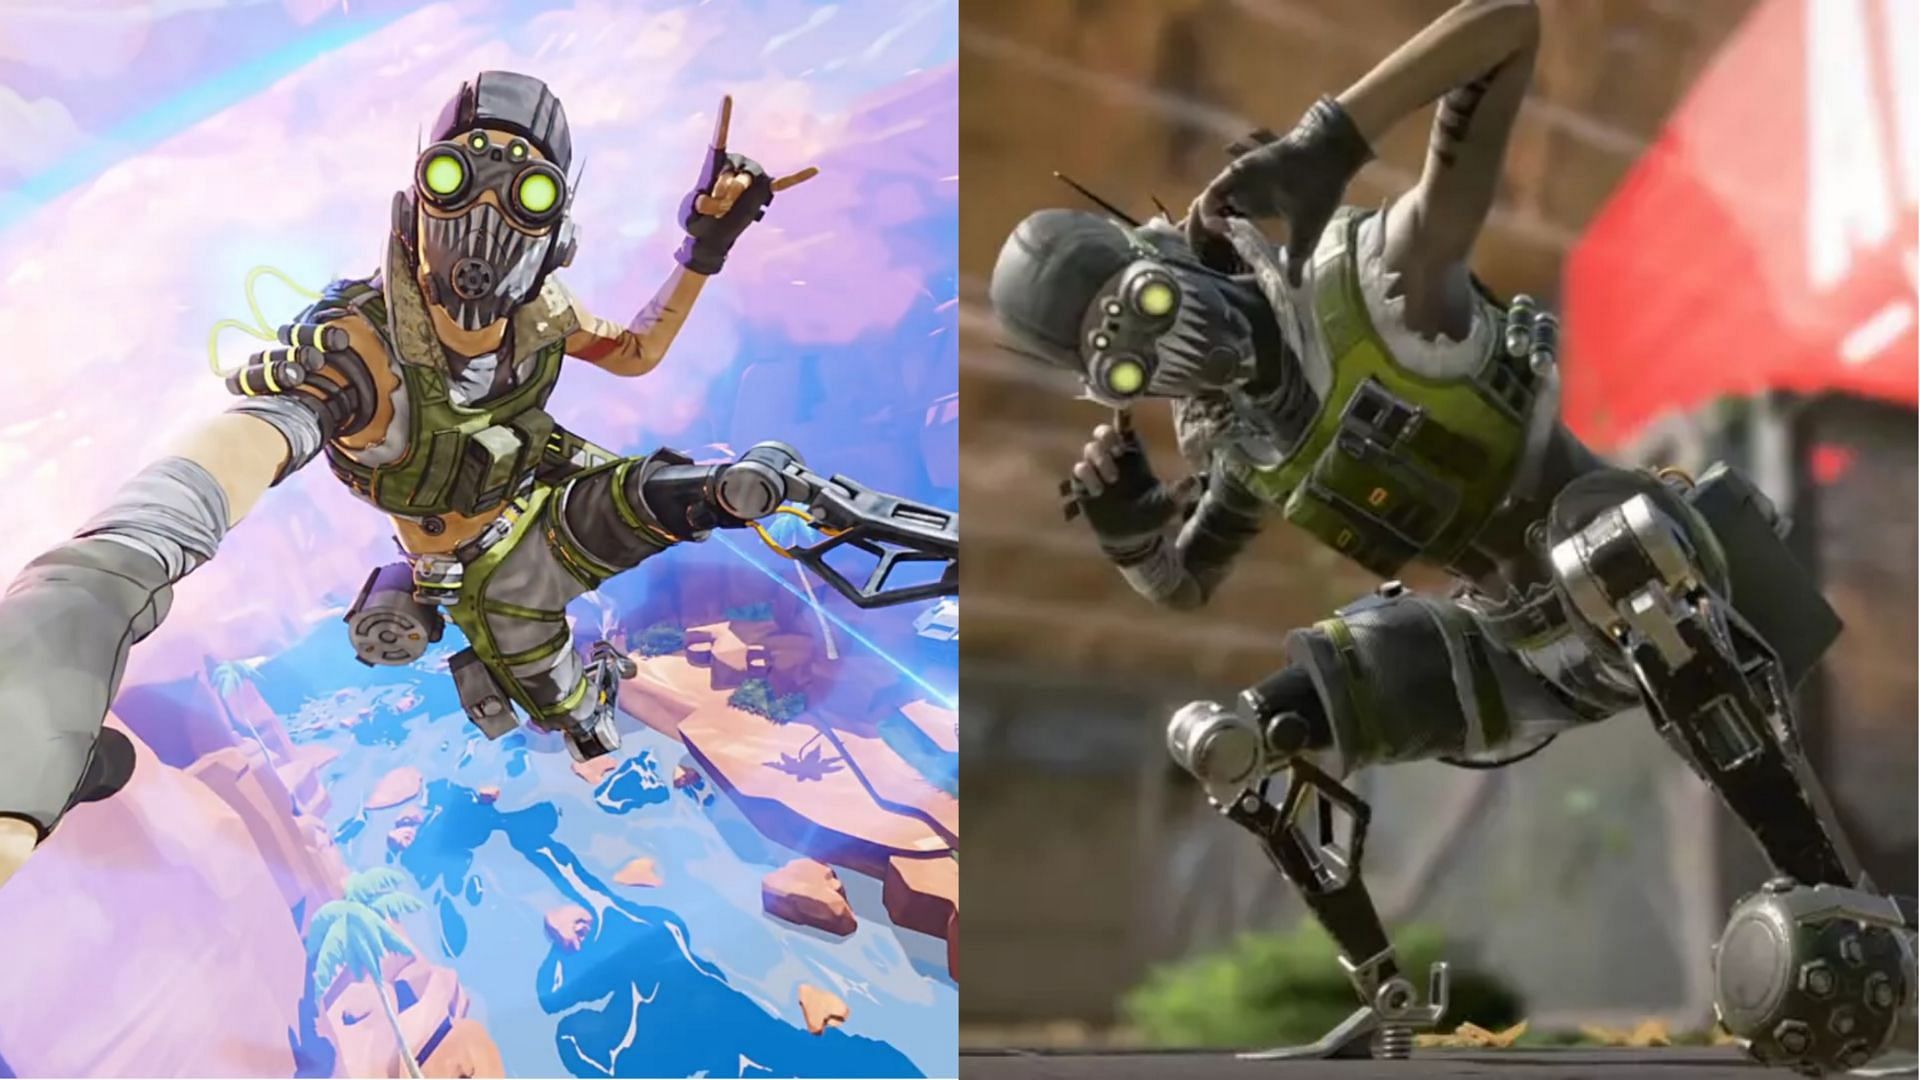 Octane in the Season 2 trailer (left) and performing his finisher on the right (Image via EA)